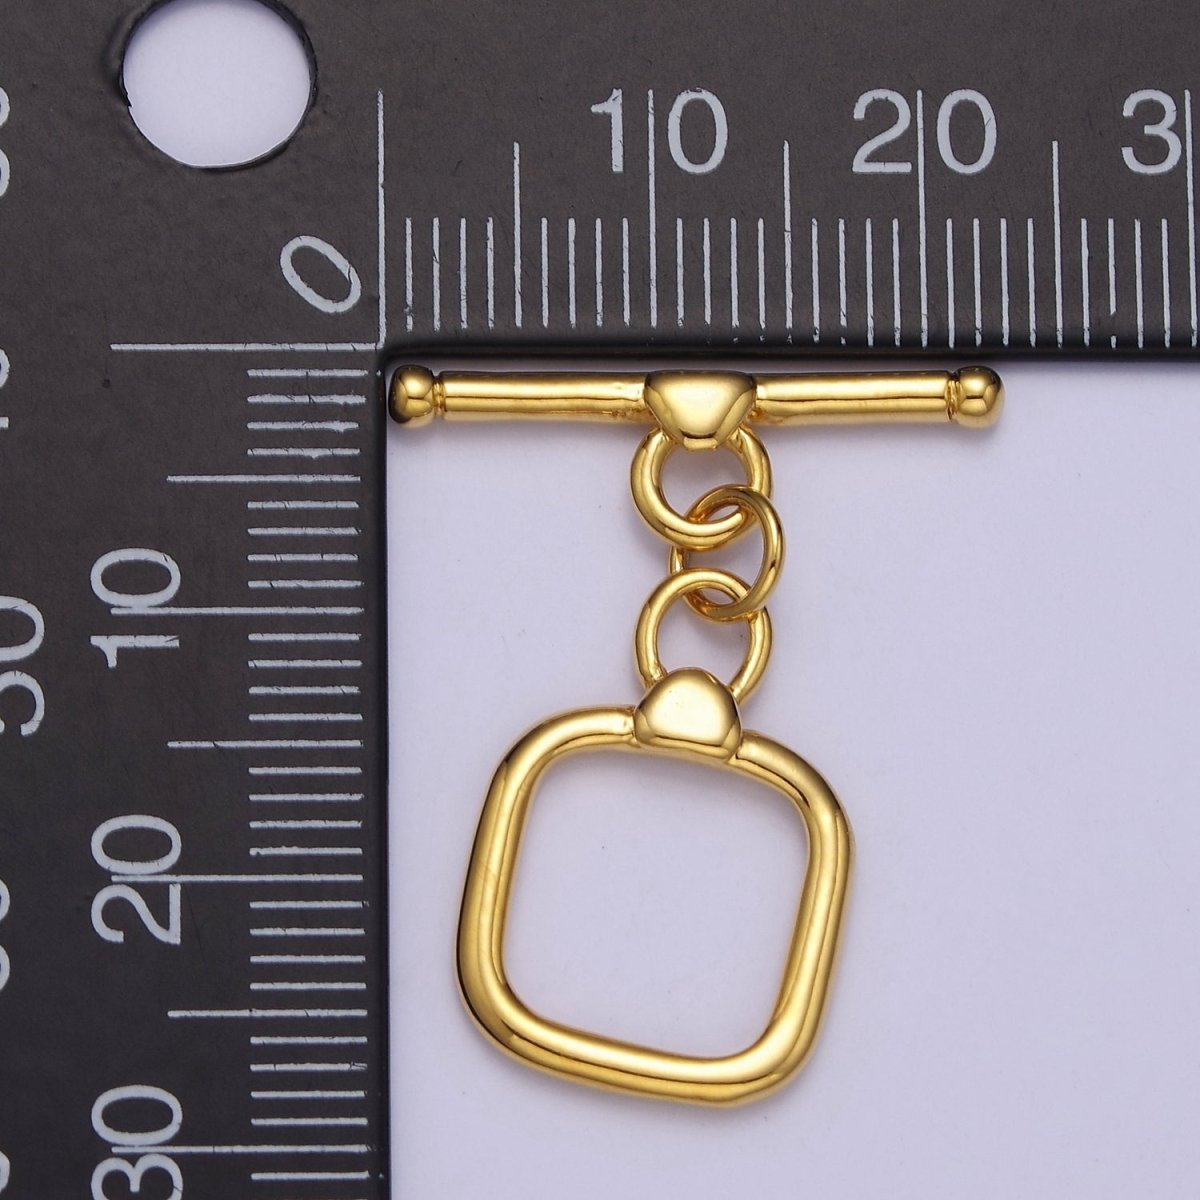 Geometric Square Toggle Clasp Connector, 24k Gold Filled Toggle Clasp, Jewelry End Clasp for Bracelet, Necklace Closure L-687 L-688 L-689 - DLUXCA